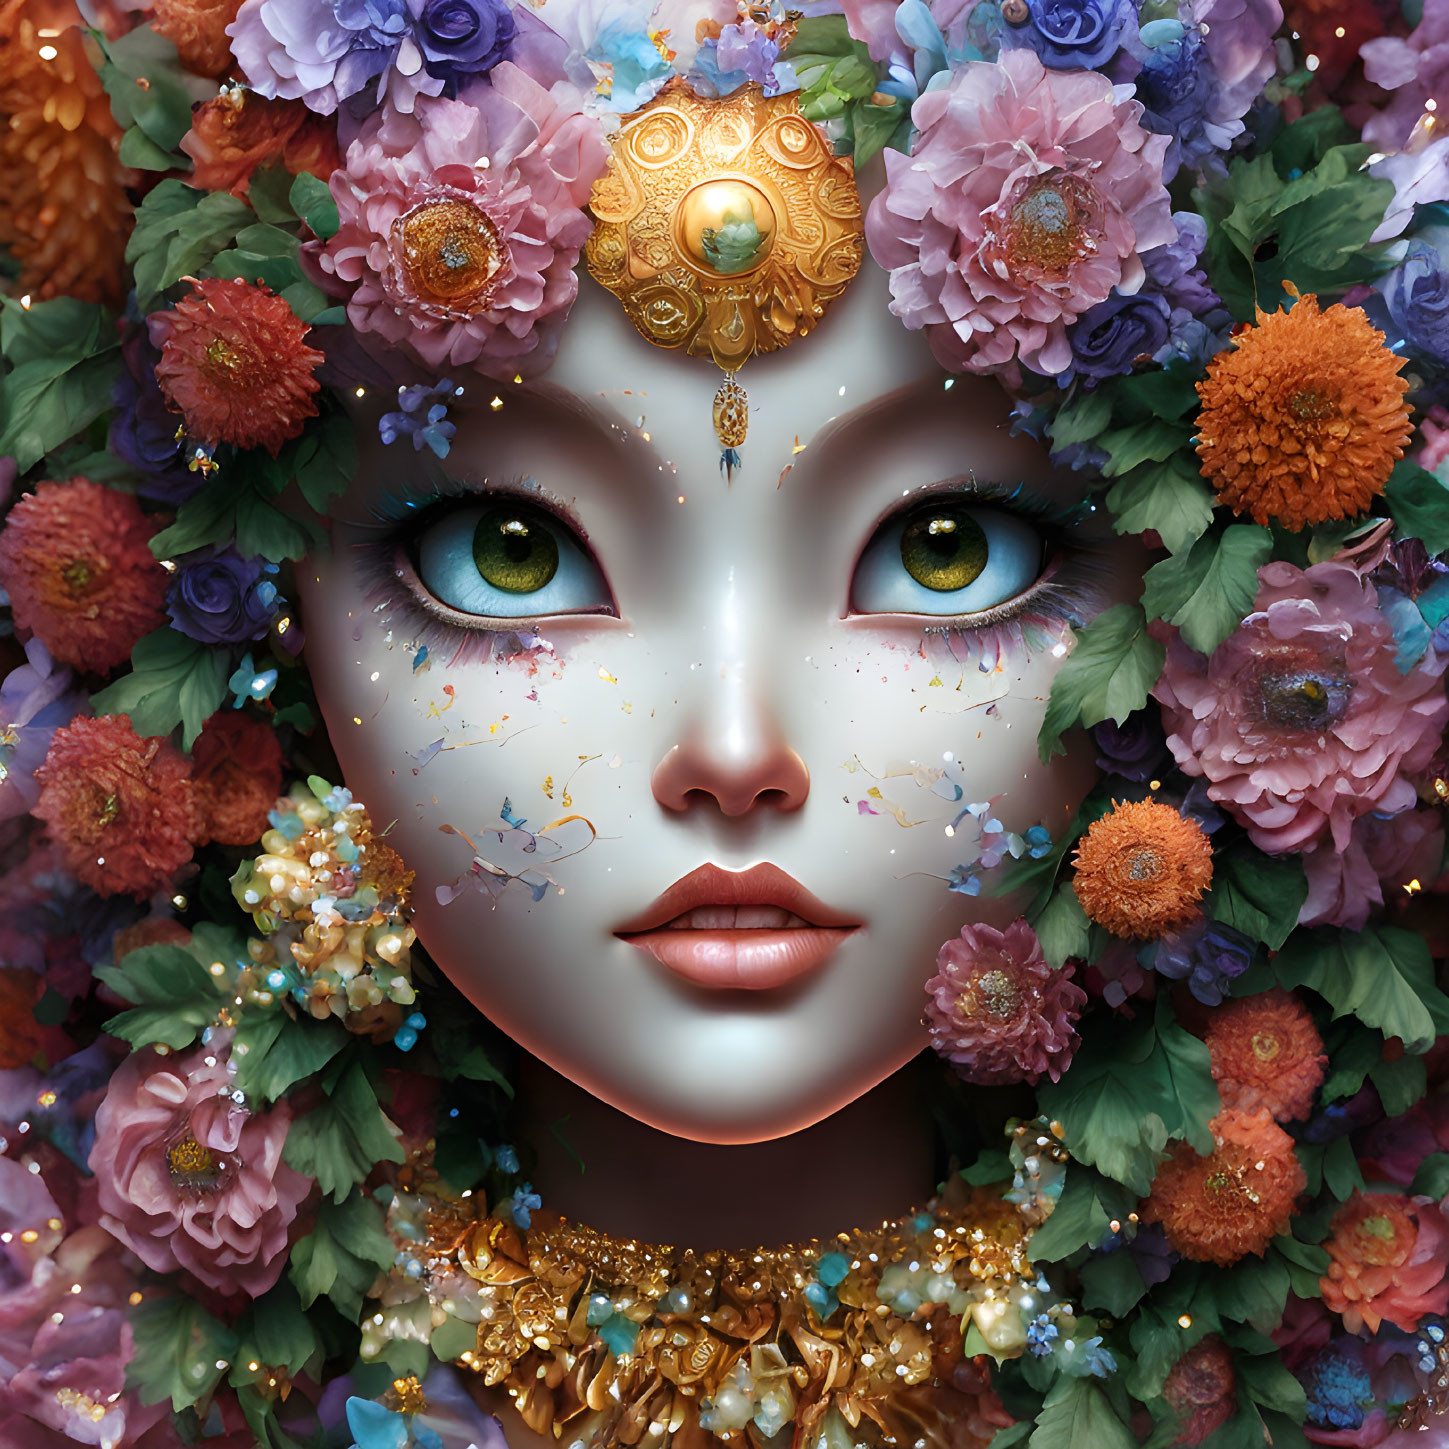 Colorful Floral Digital Artwork Featuring Expressive Green Eyes